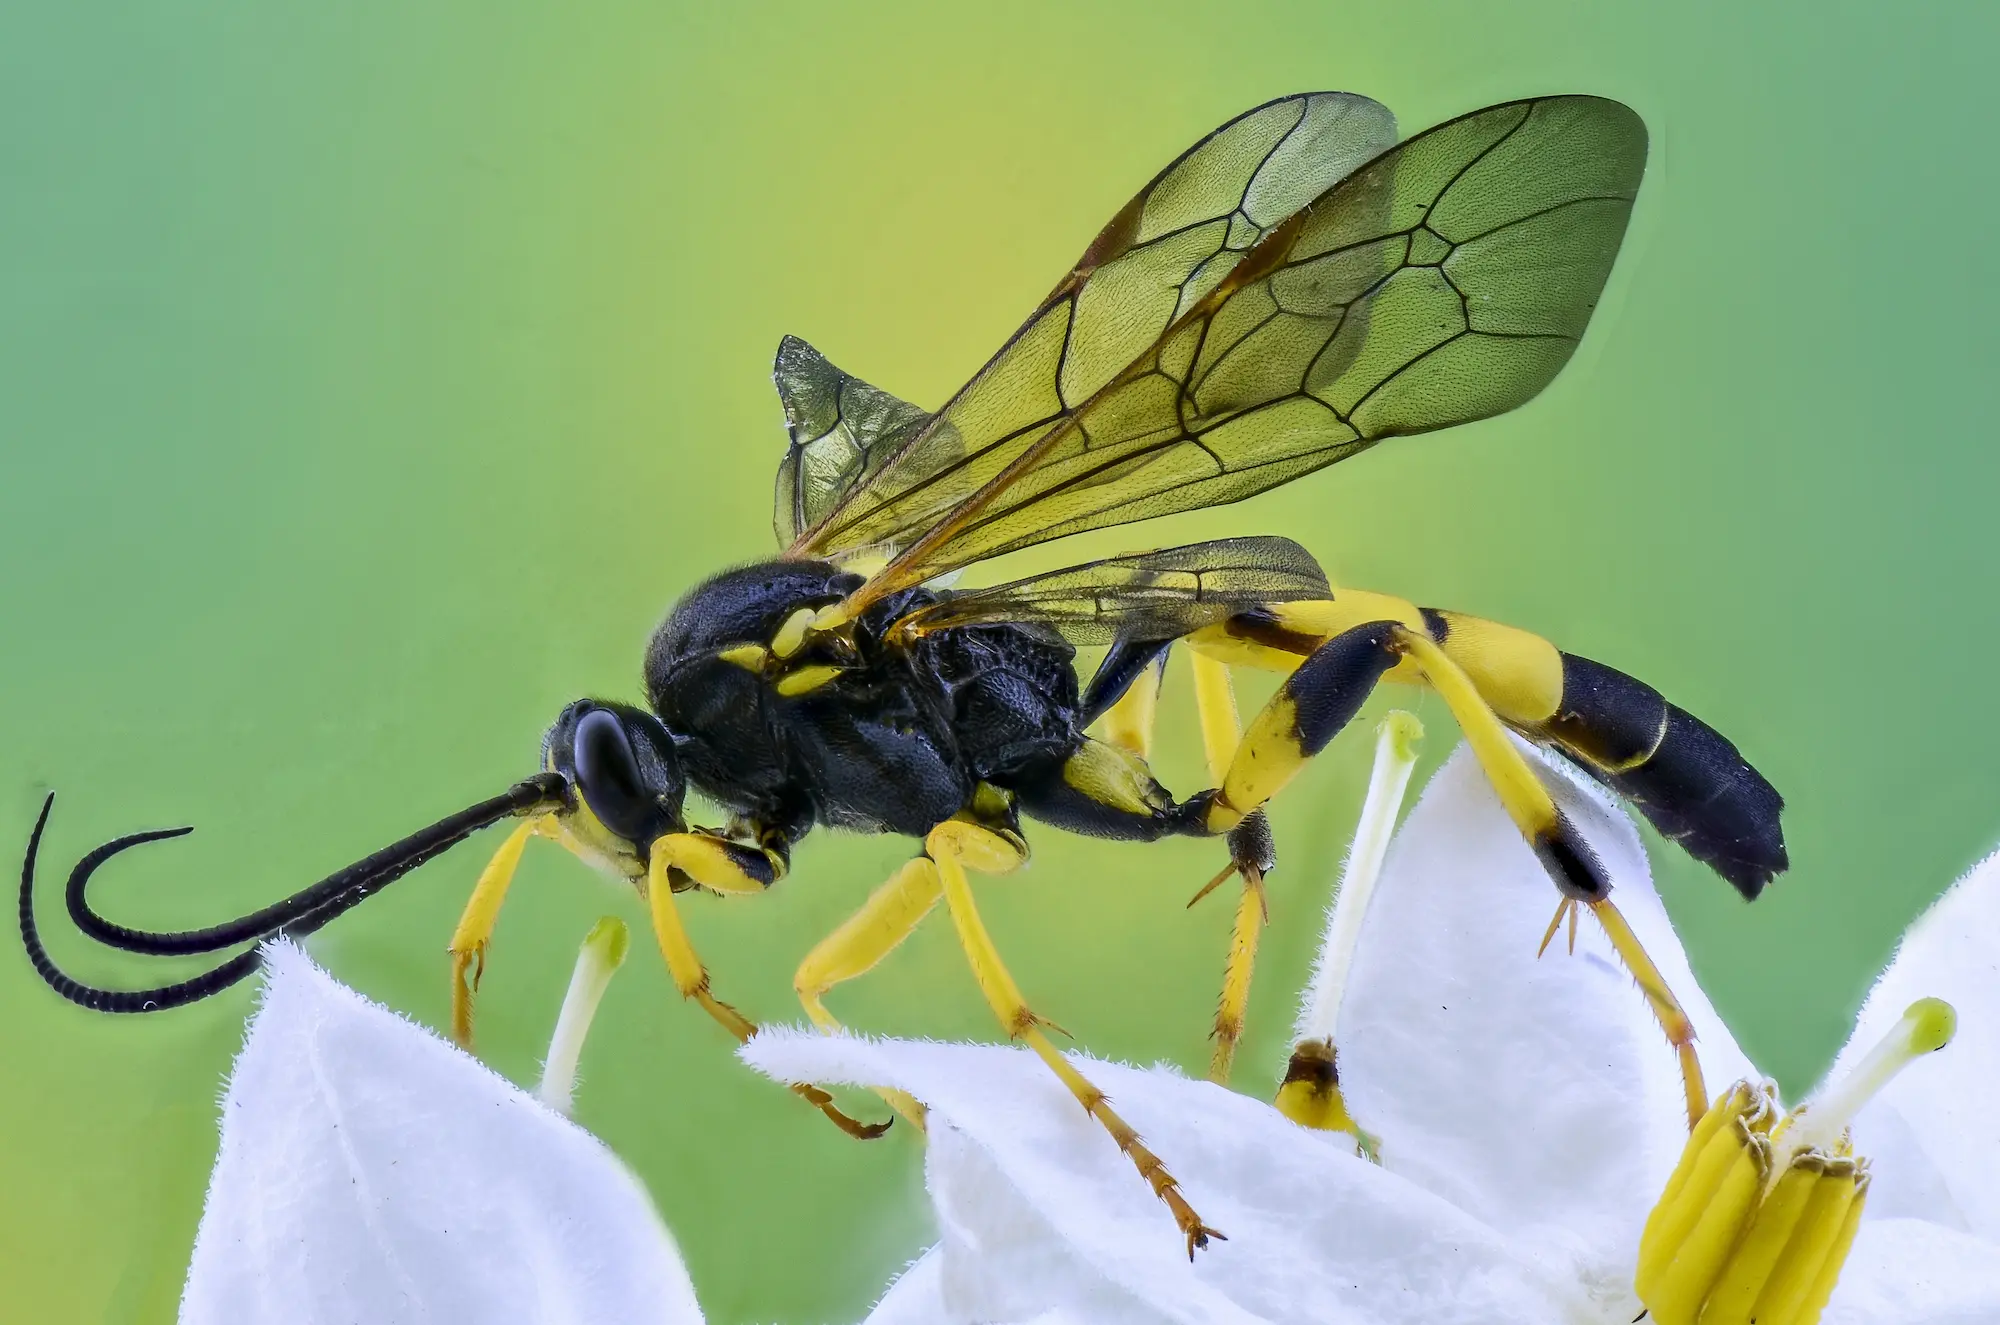 Wasp that can cause discomfort in your home